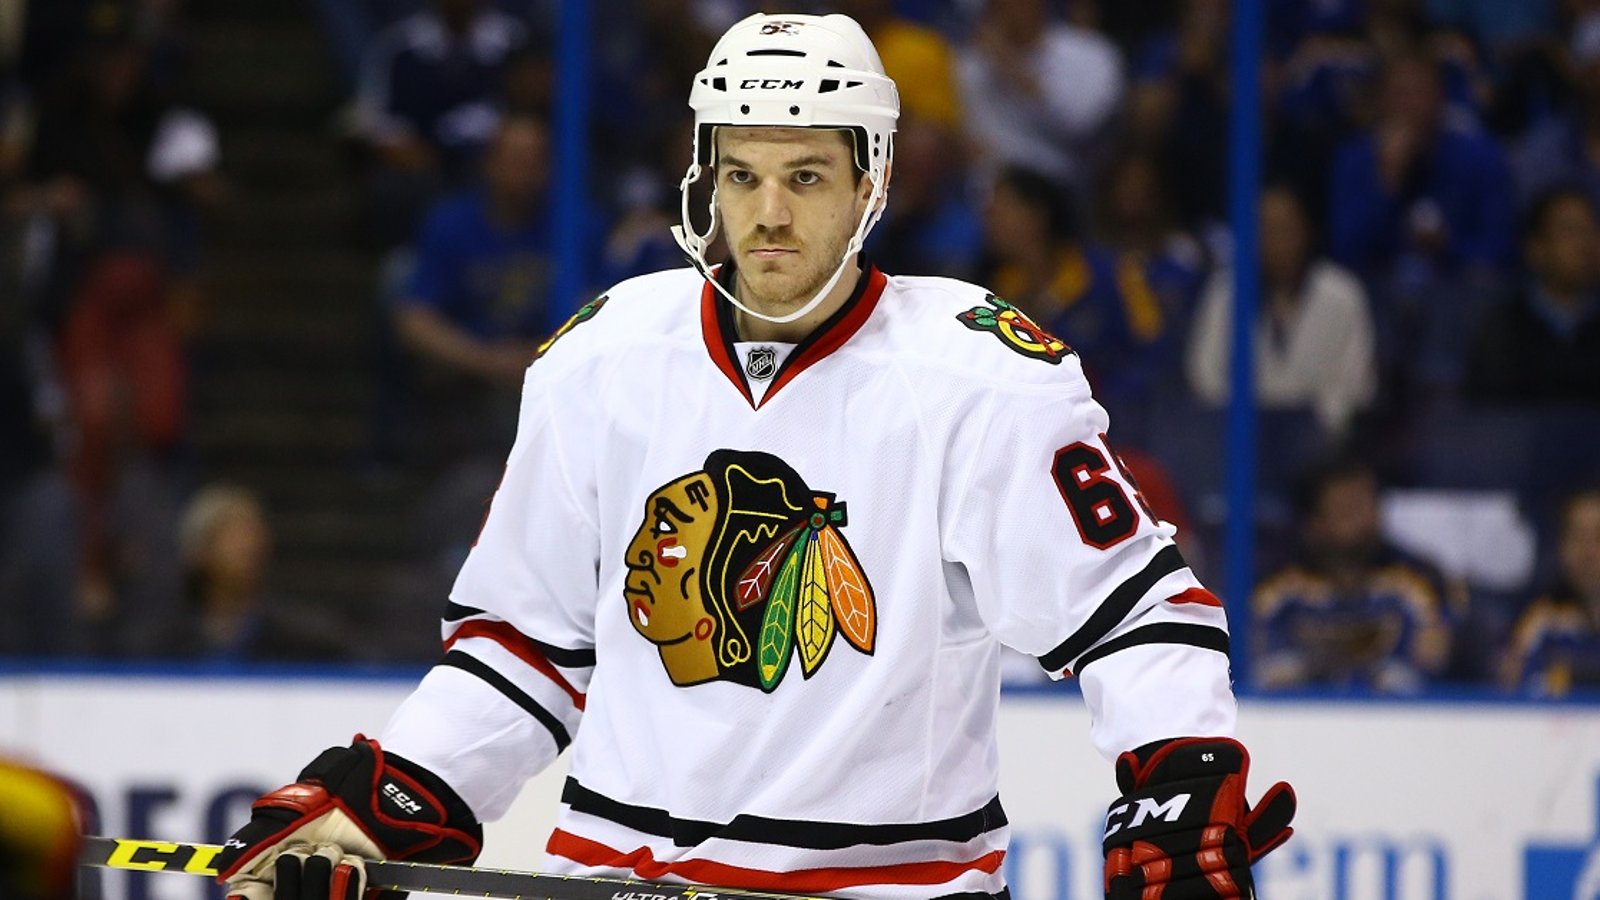 Andrew Shaw becomes the first NHL player to defend Jacob Panetta.